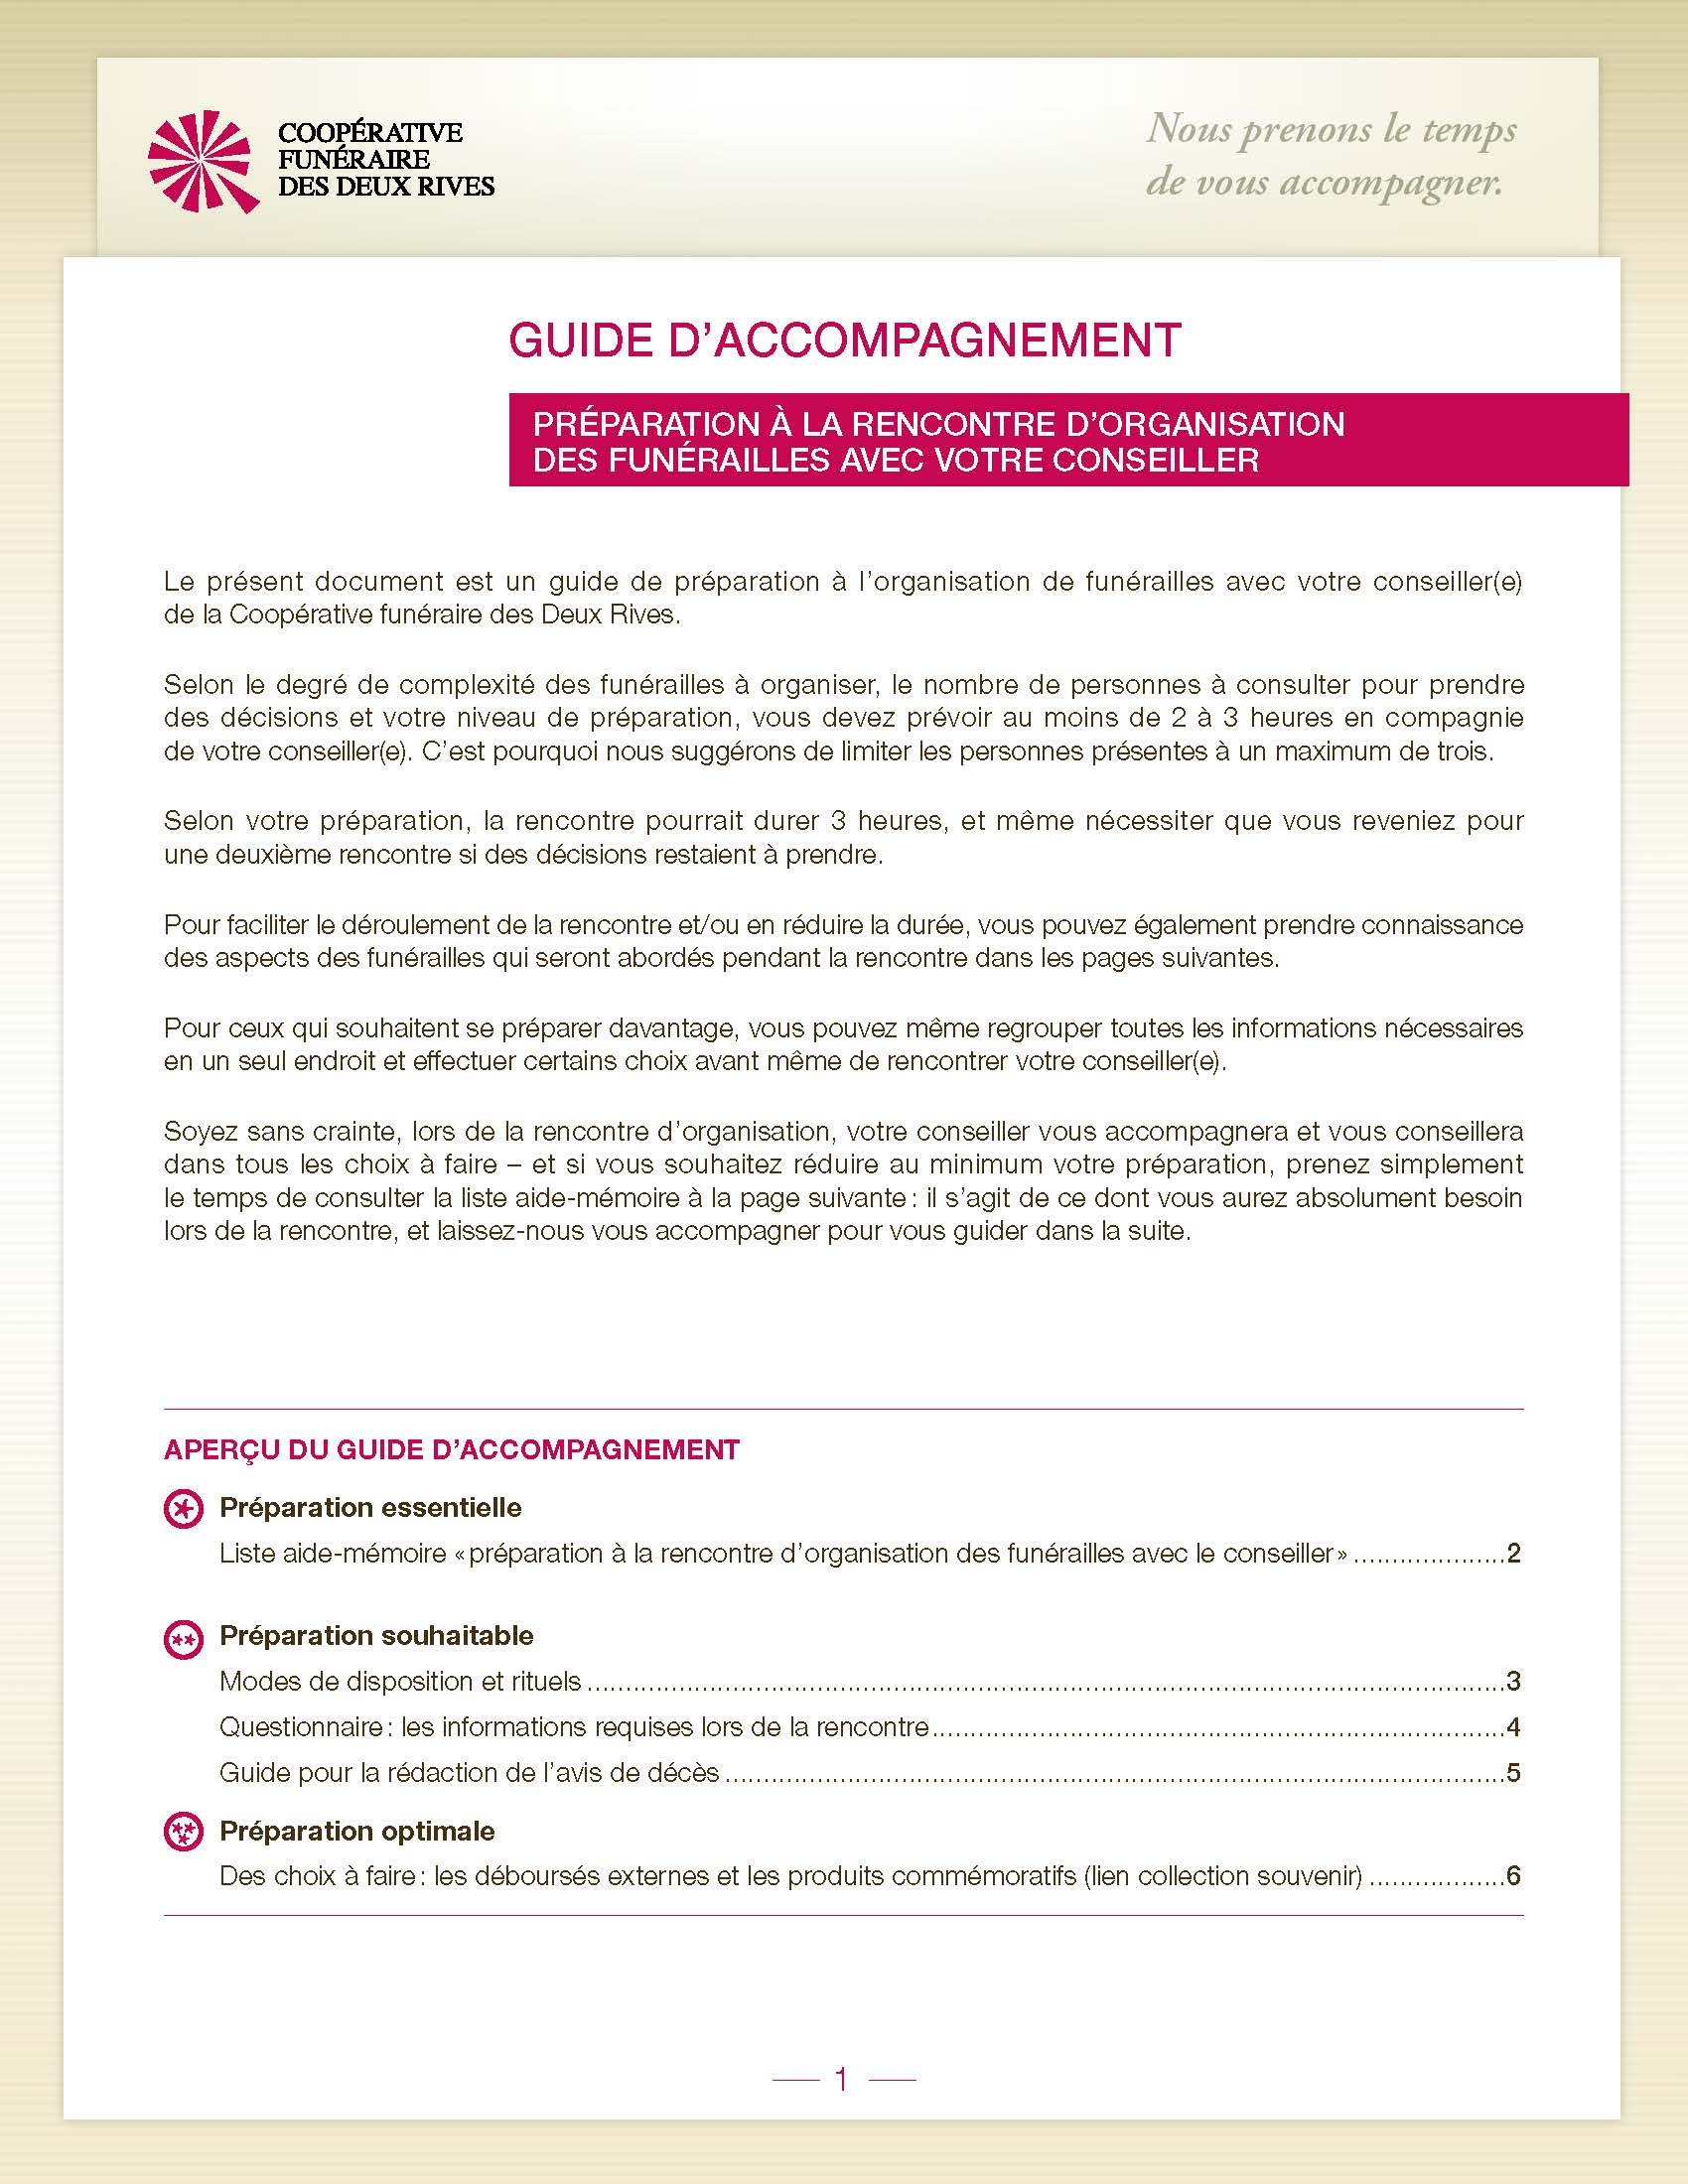 cf2r_guide_accompagnement_maj_avr020_v2_hr_page_1